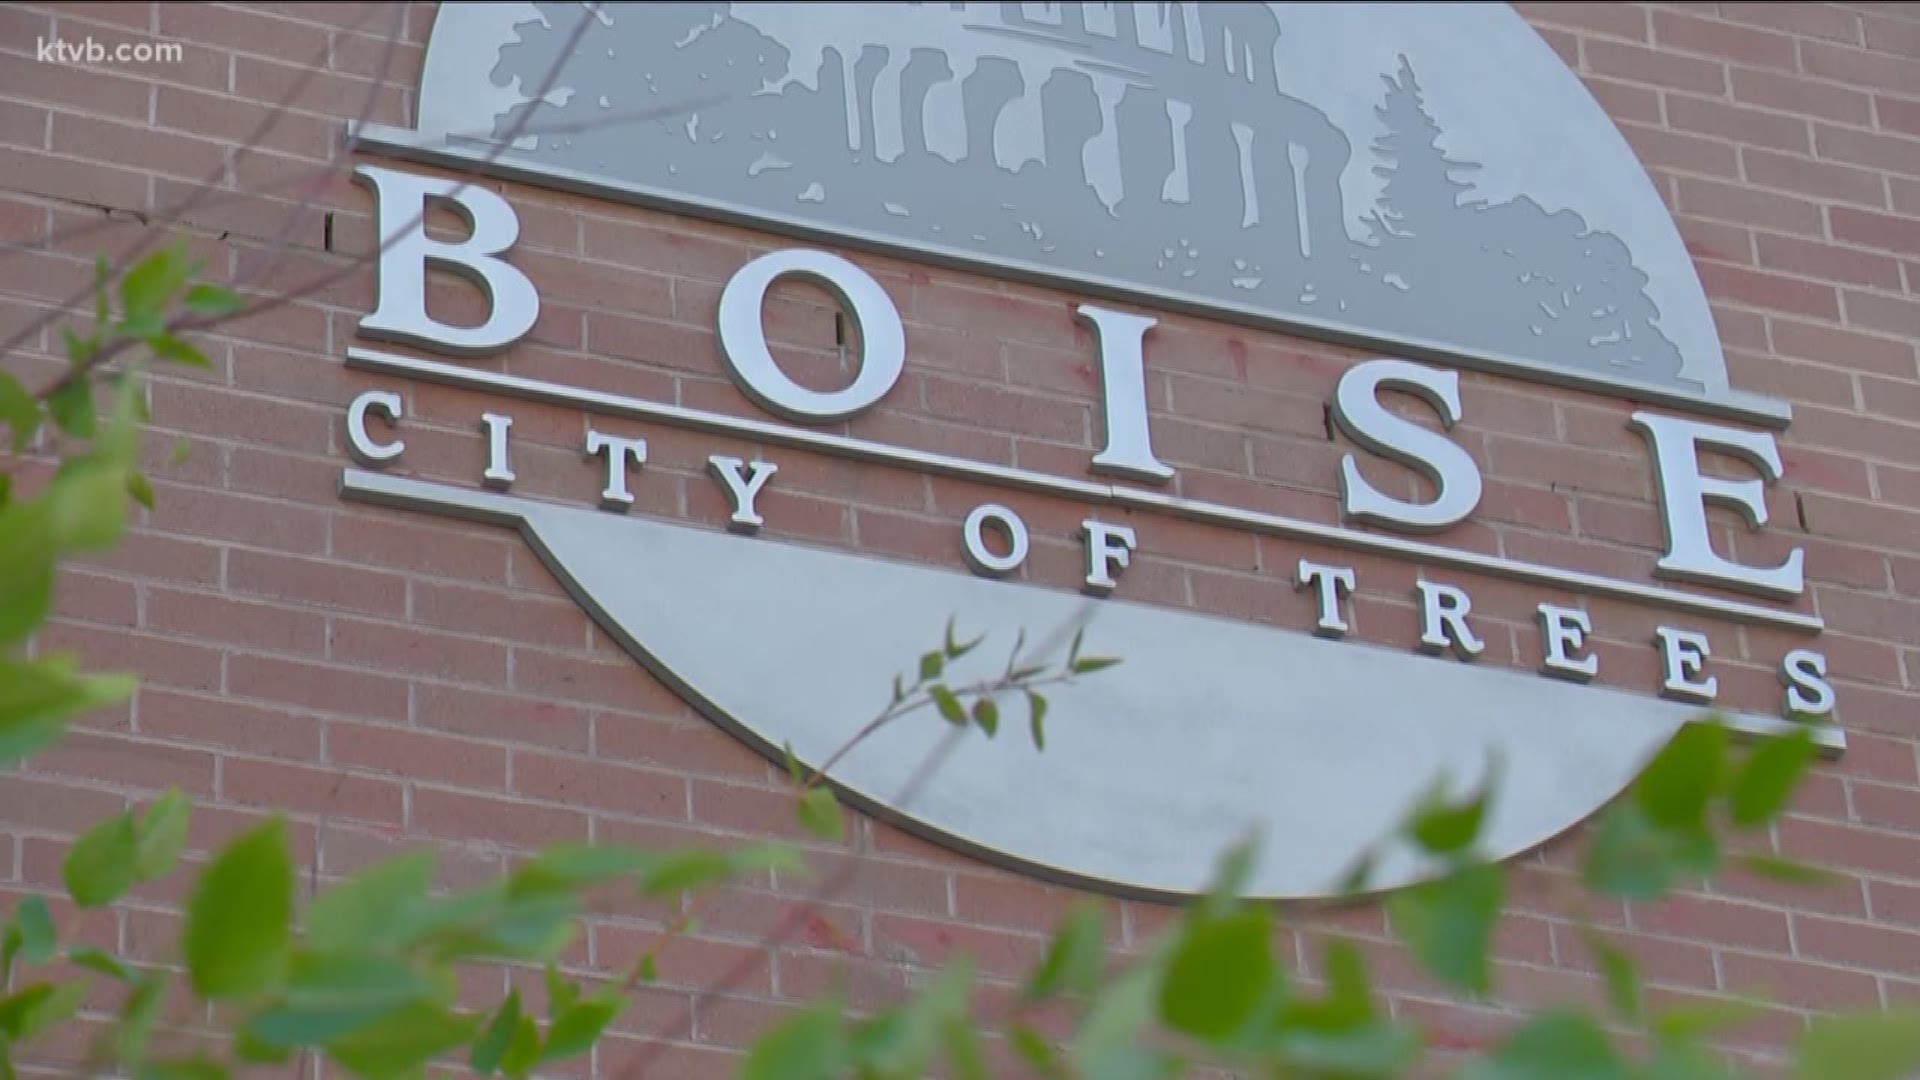 Boise City Council member Lisa Sanchez says she received a lot of complaints about the fees.